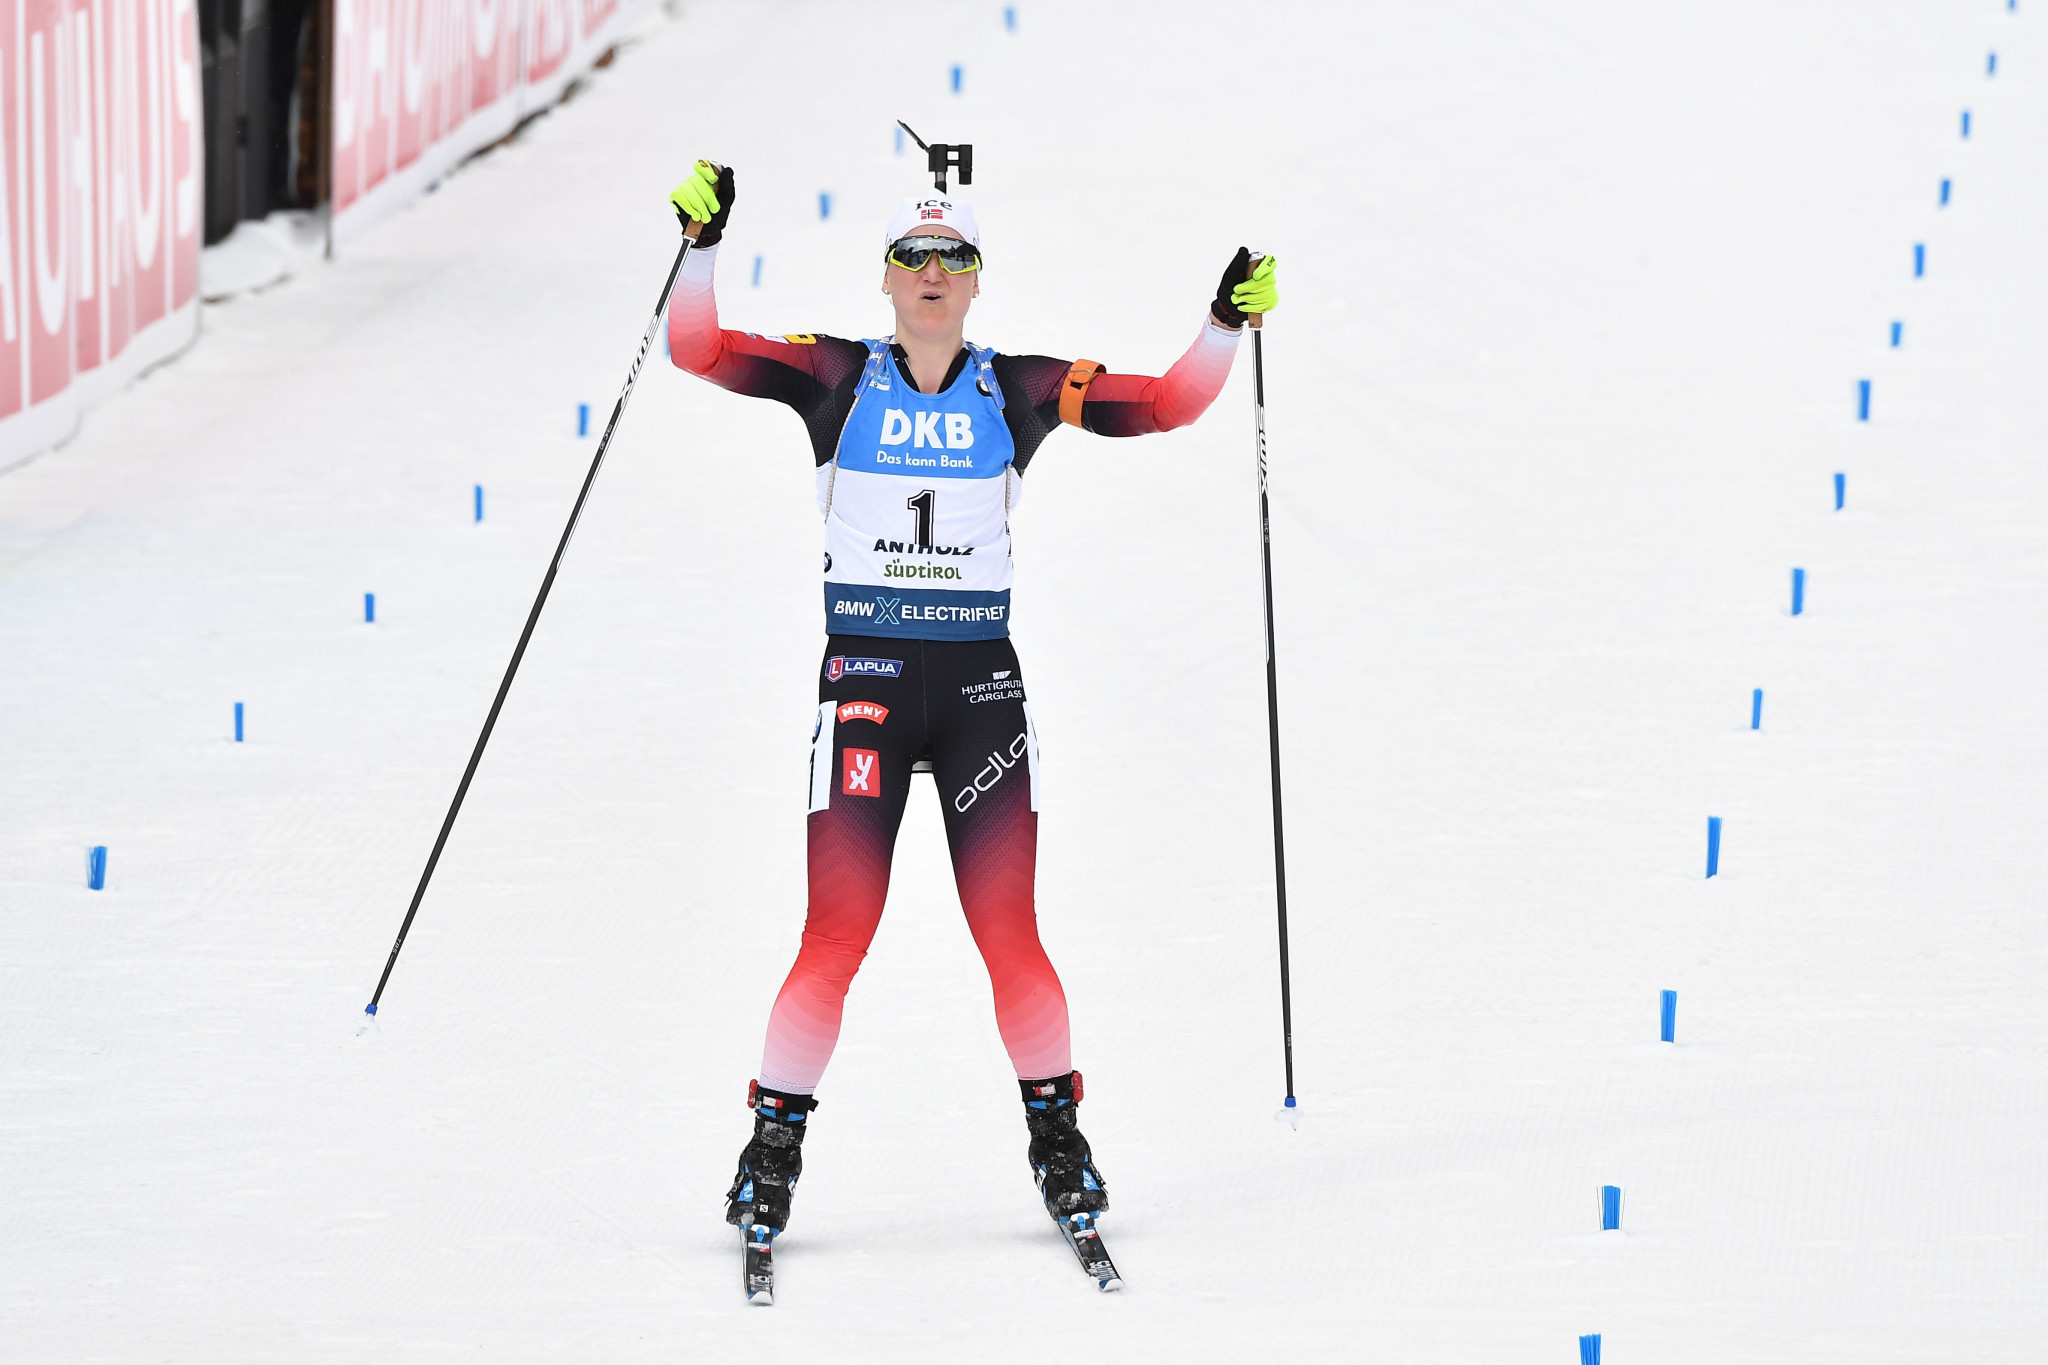 Magnificent Røiseland wins fifth gold as Biathlon World Championships conclude